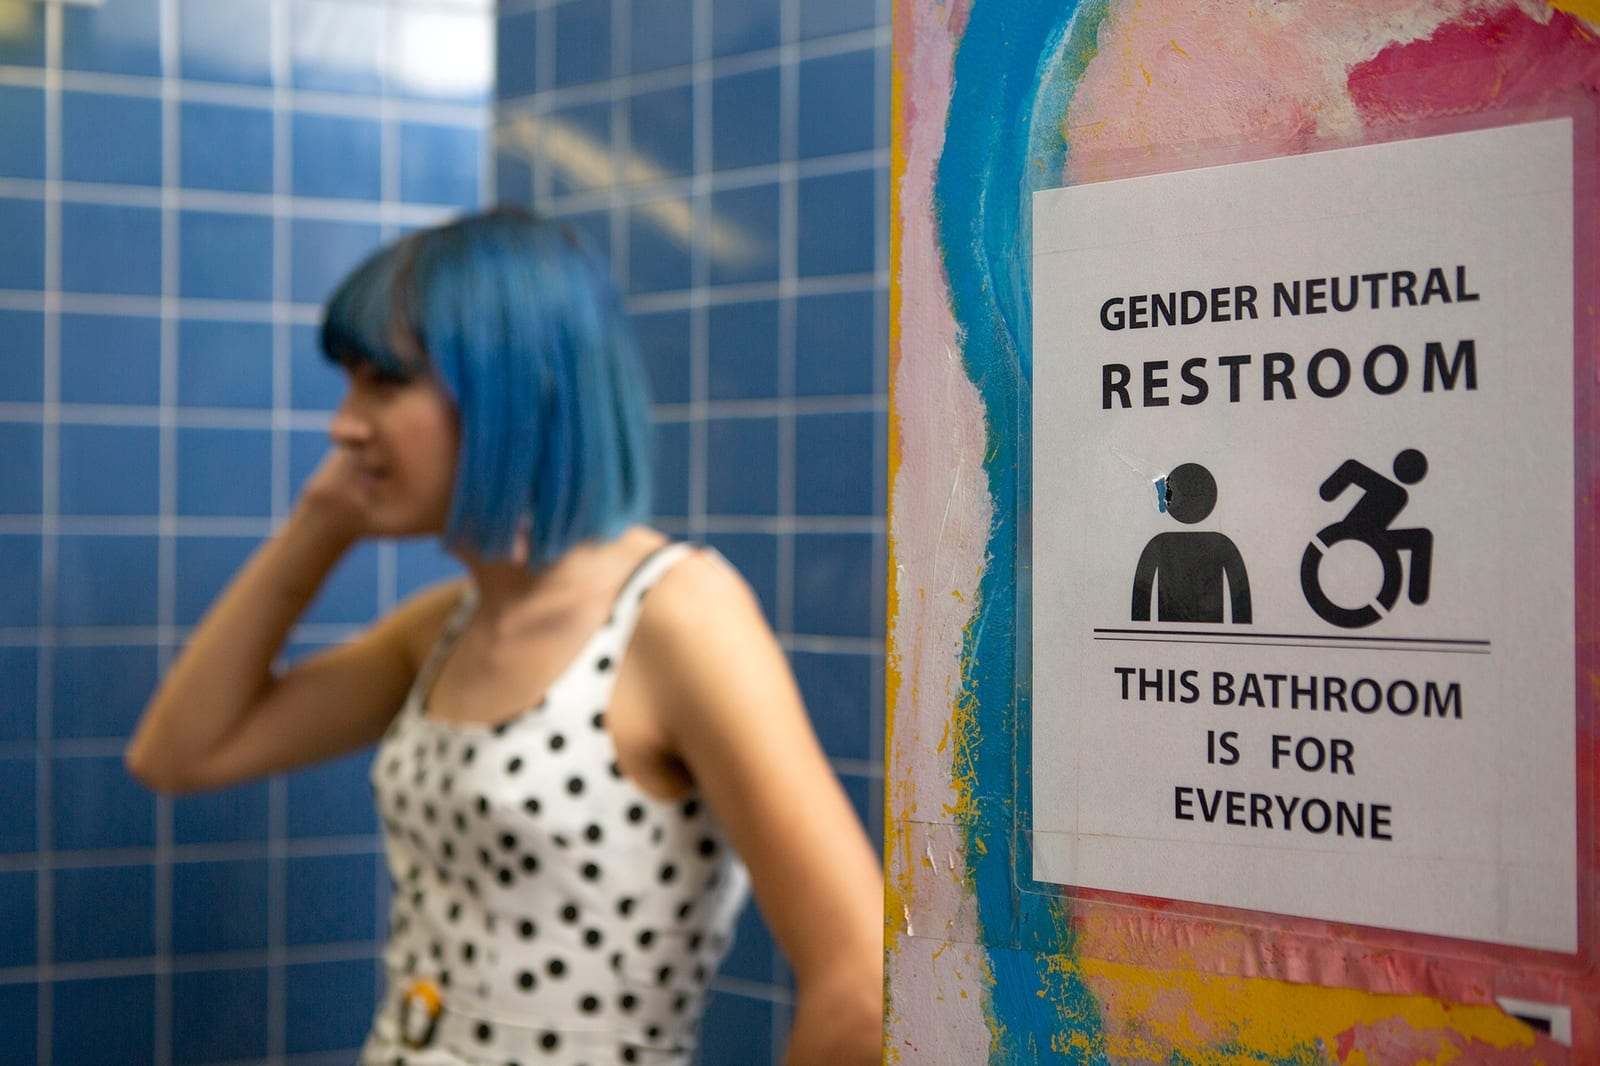 A female-presenting person stands in a restroom. A sign on the wall reads, "Gender neutral restroom, this bathroom is for everyone."